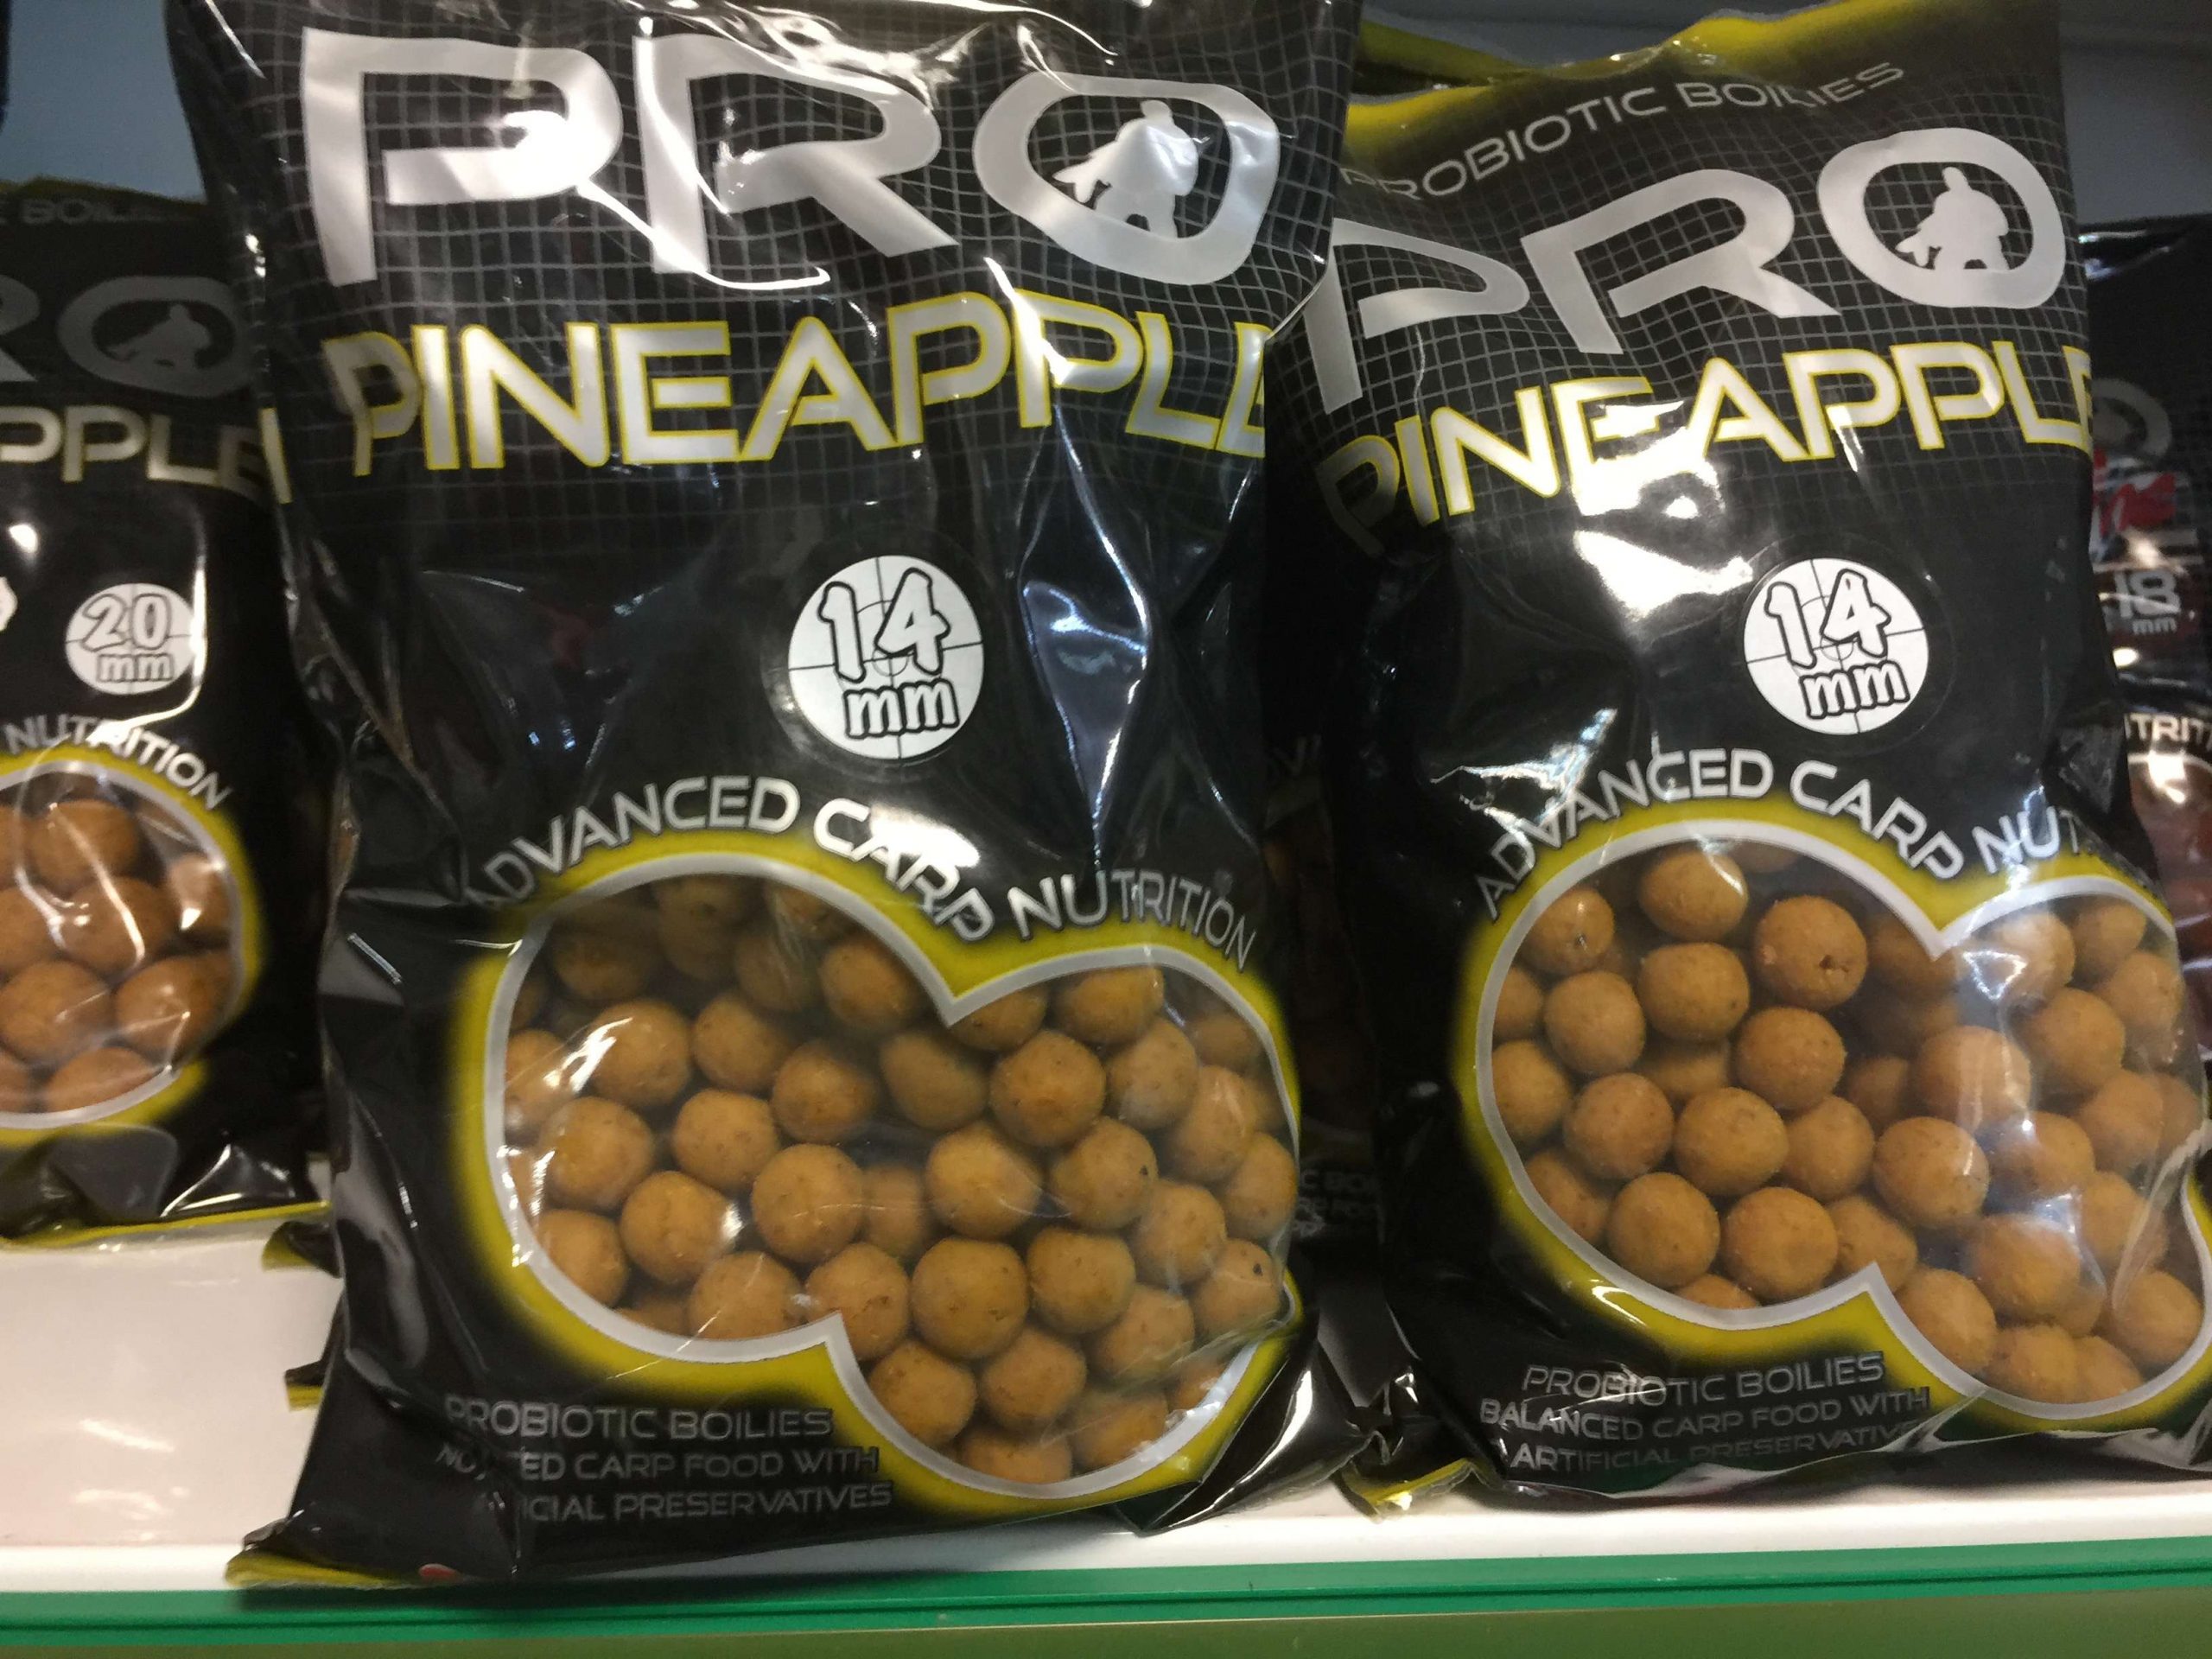 And some advanced carp nutrition is a must â¦ pineapple flavor, of course.
